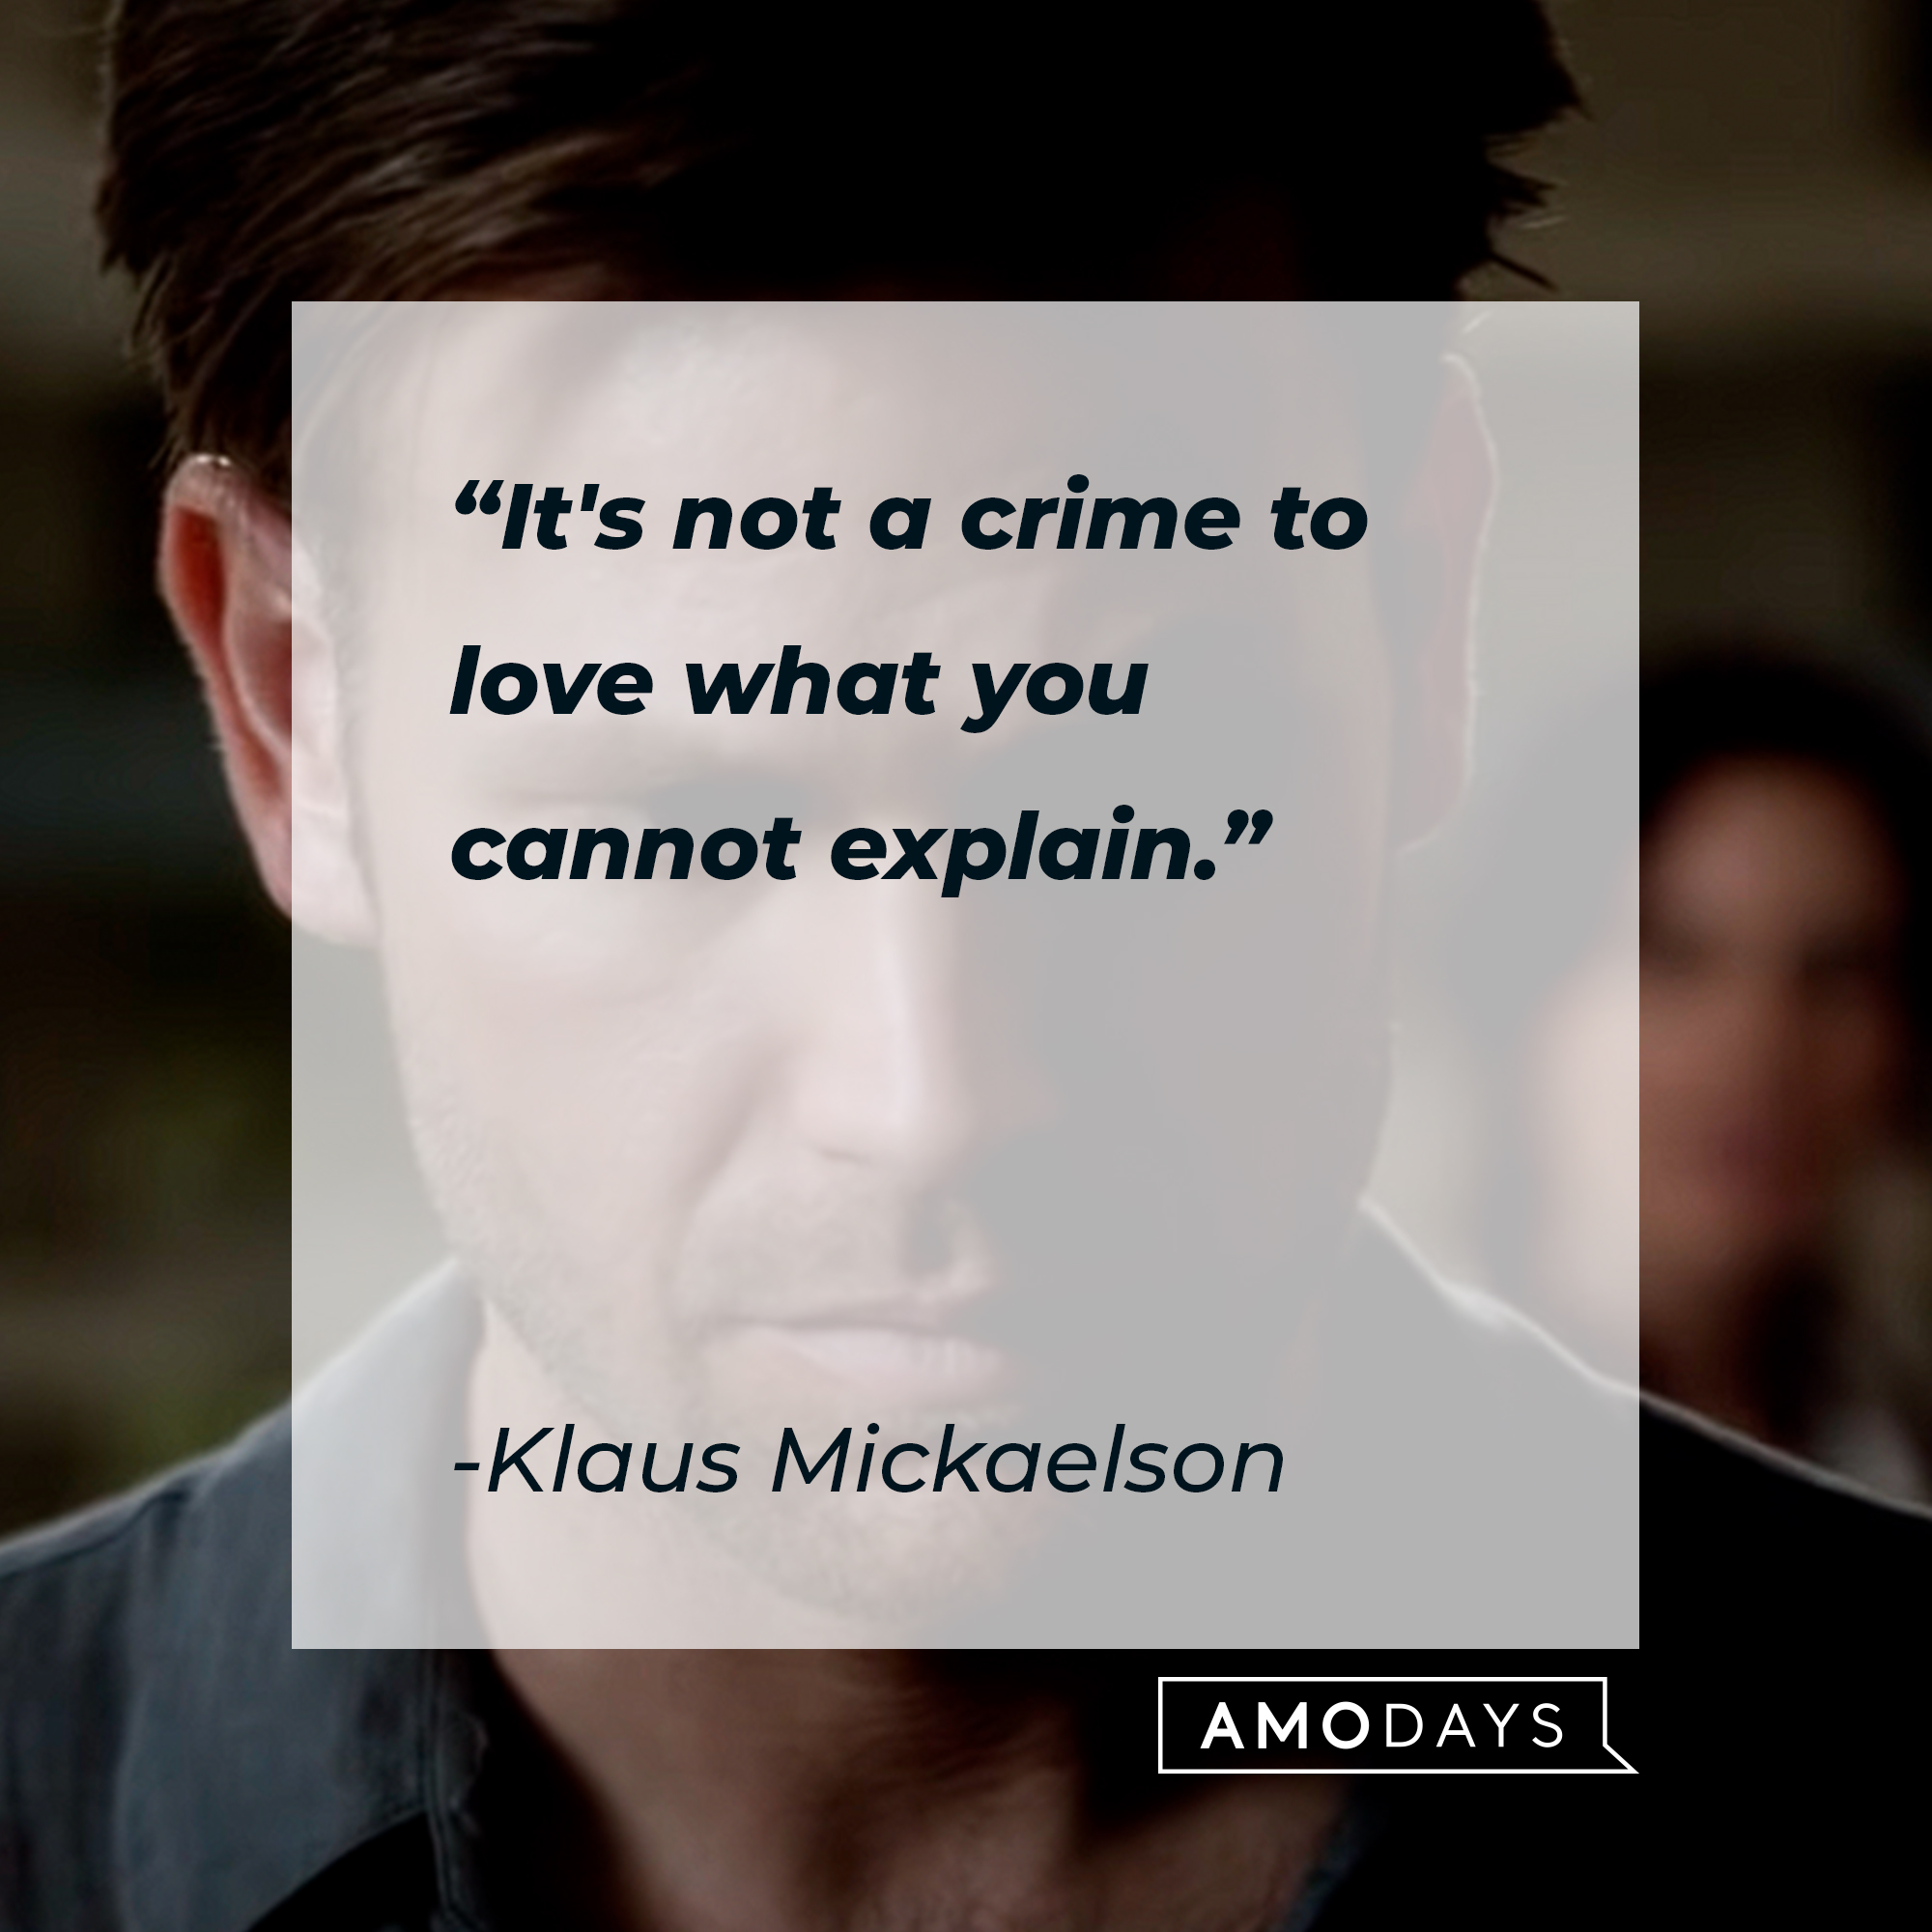 Klaus Mickaelson's quote: "It's not a crime to love what you cannot explain" | Source: youtube.com/stillwatchingnetflix